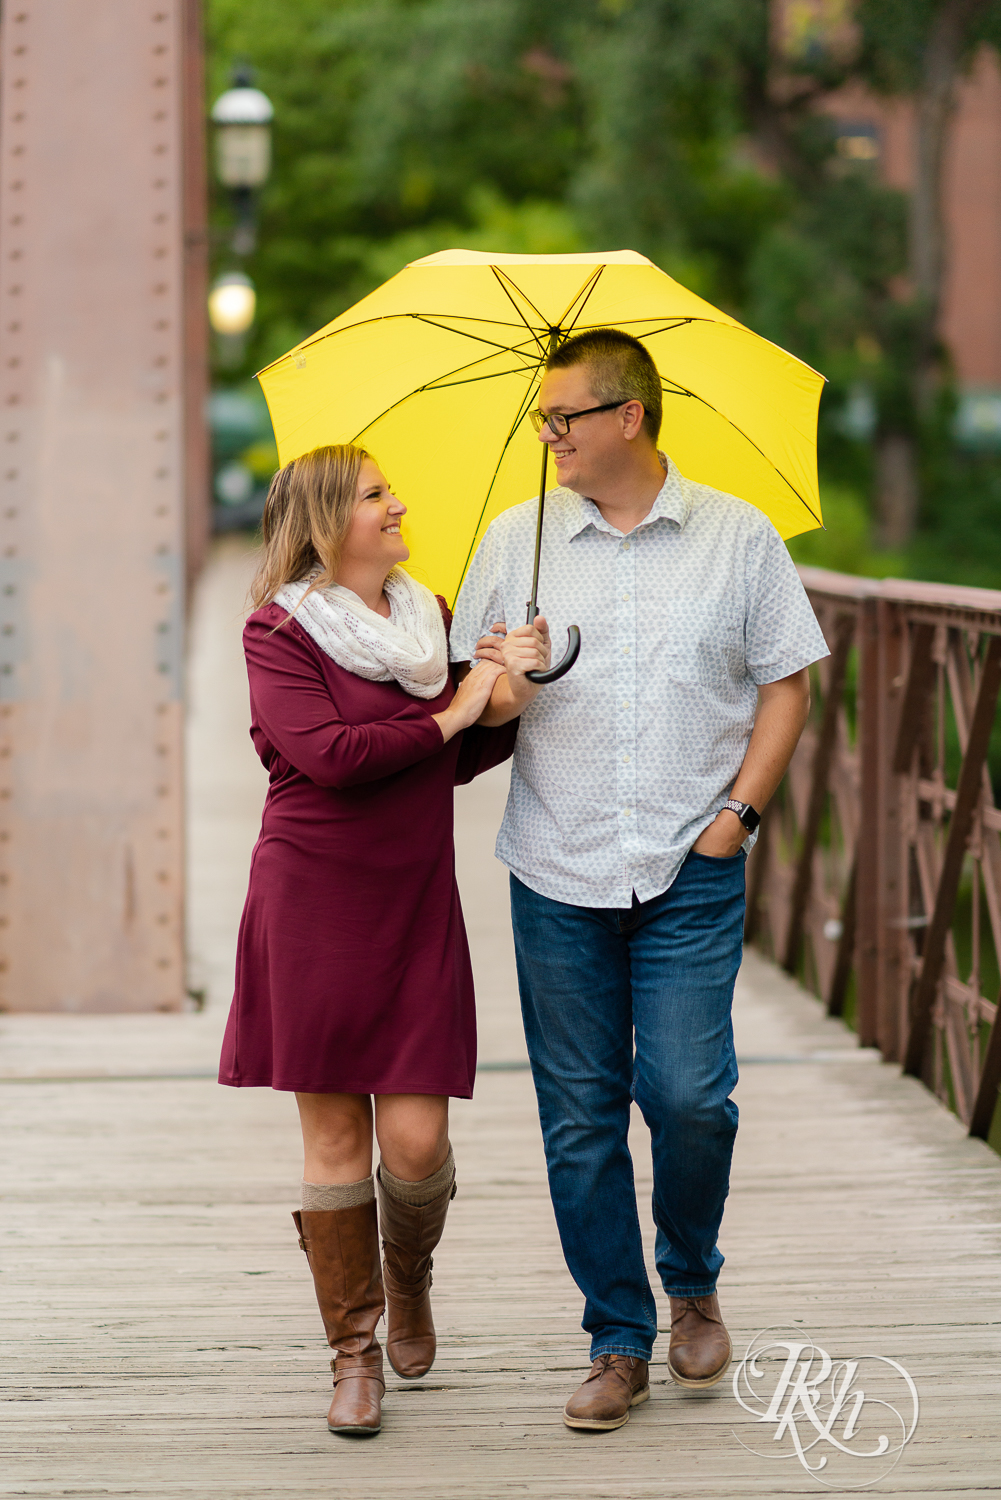 Man in glasses and woman is red dress and scarf smiling and holding umbrella on bridge in Minneapolis, Minnesota.